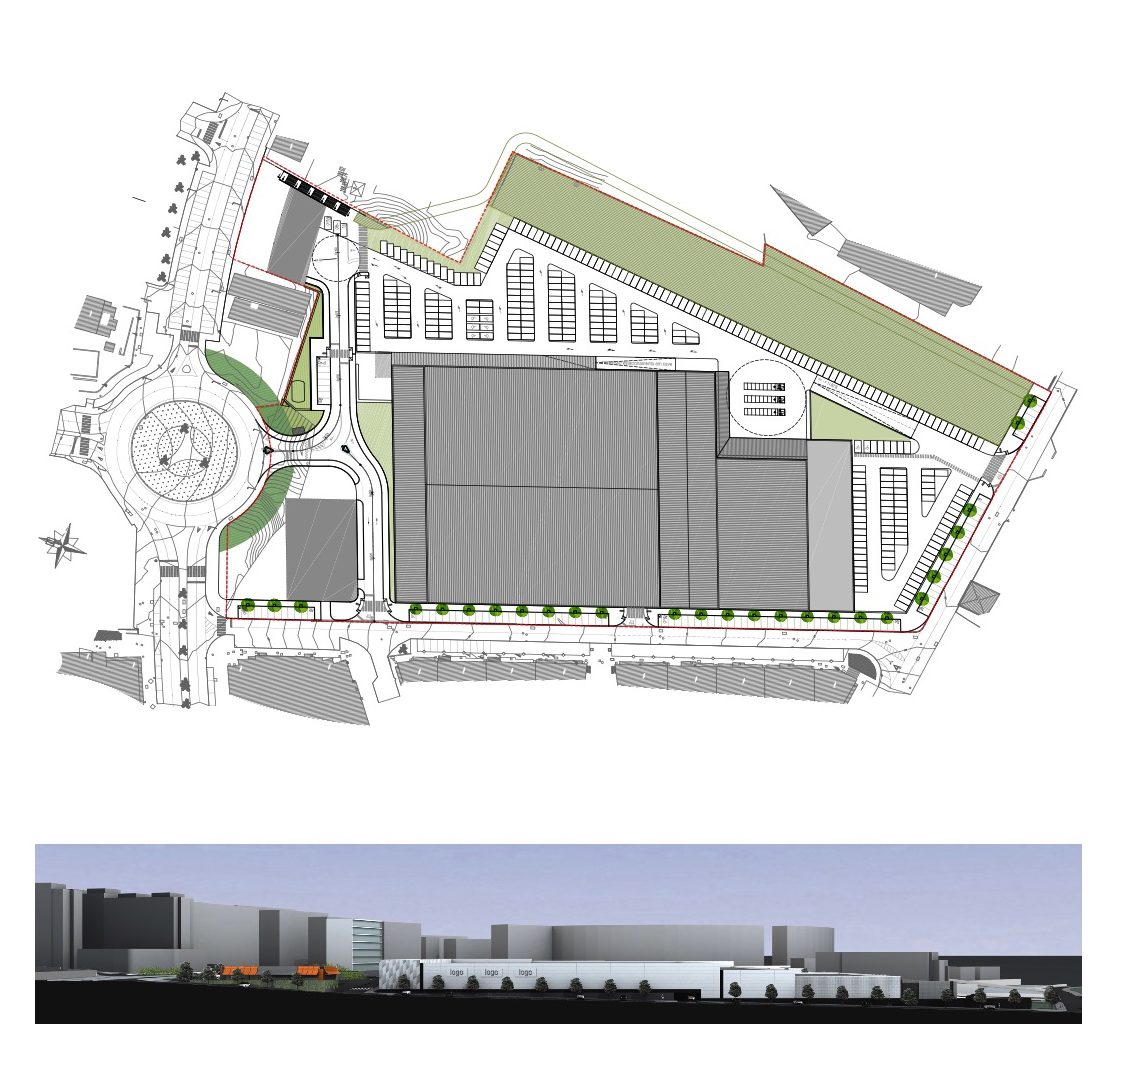 Allotment in Funchal, Madeira – 2 commercial units and housing – 29670 sq m of gross building area and 803 parking spaces on 42116 sq m of intervention area.